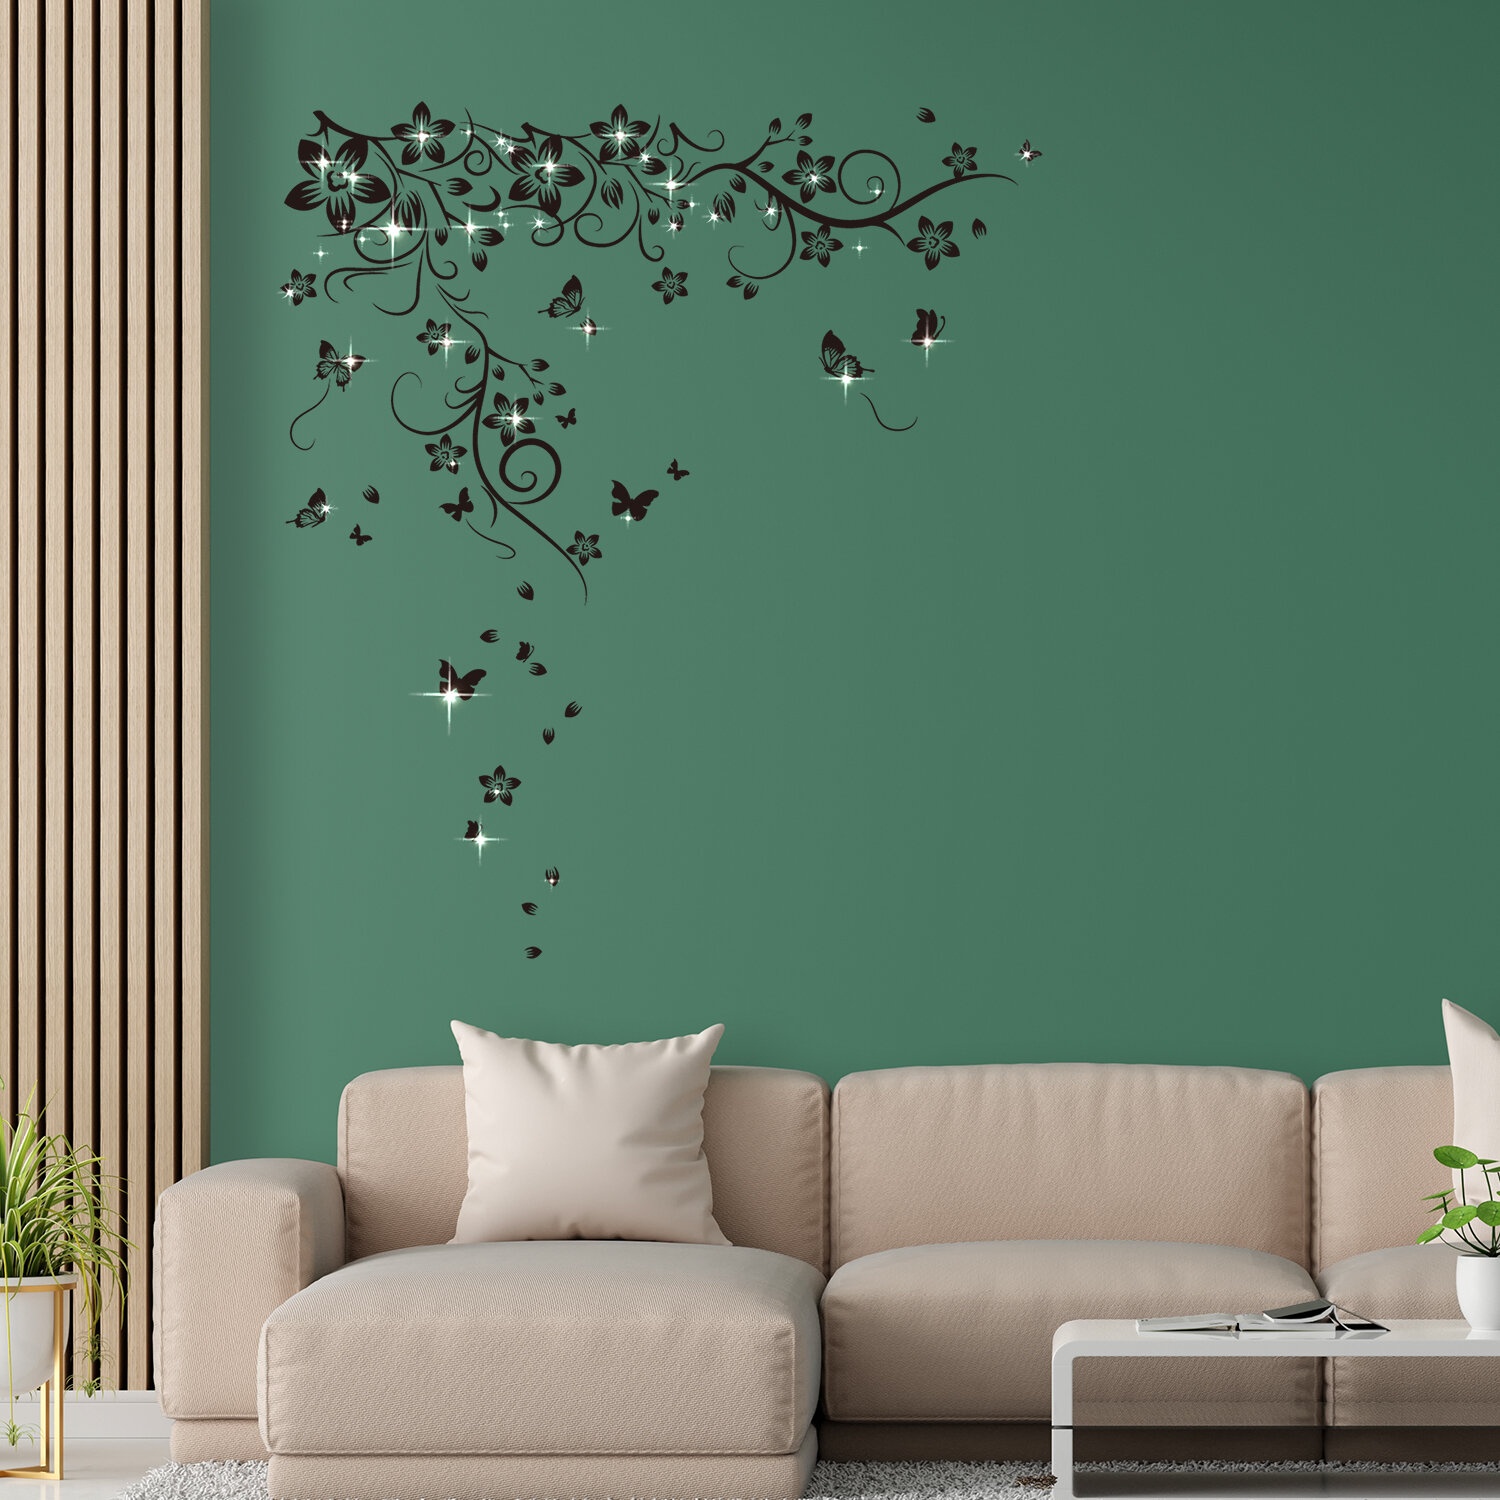 Wall Stickers For Living Rooms - VisualHunt